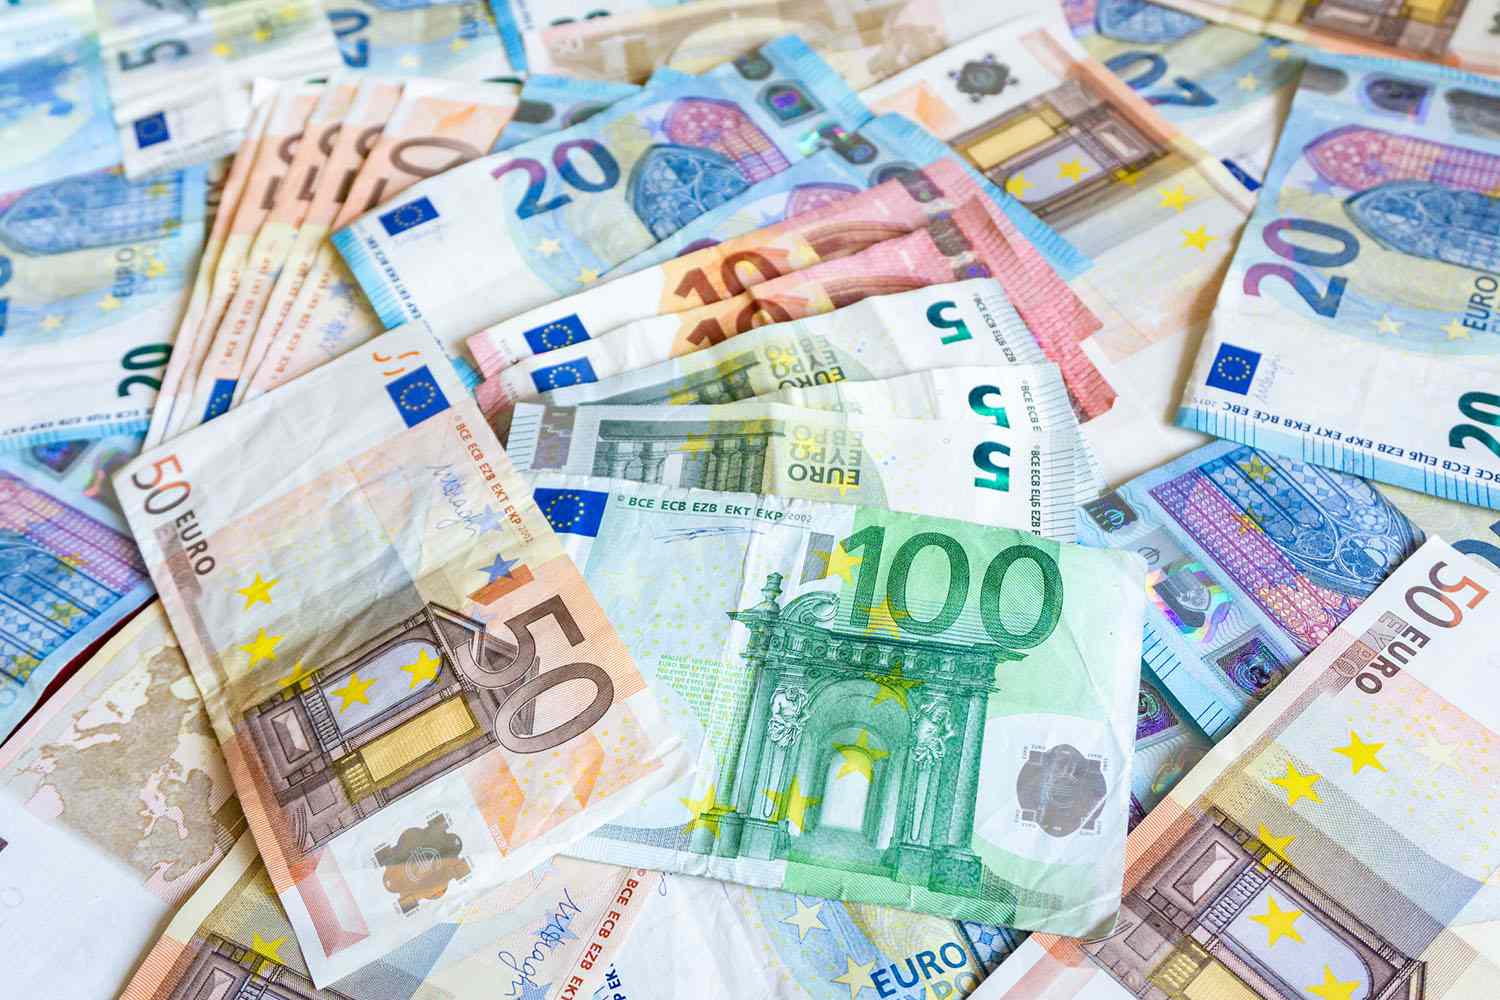 The Law On The Adoption Of The Euro Will Be Submitted To The Bulgarian Parliament Soon